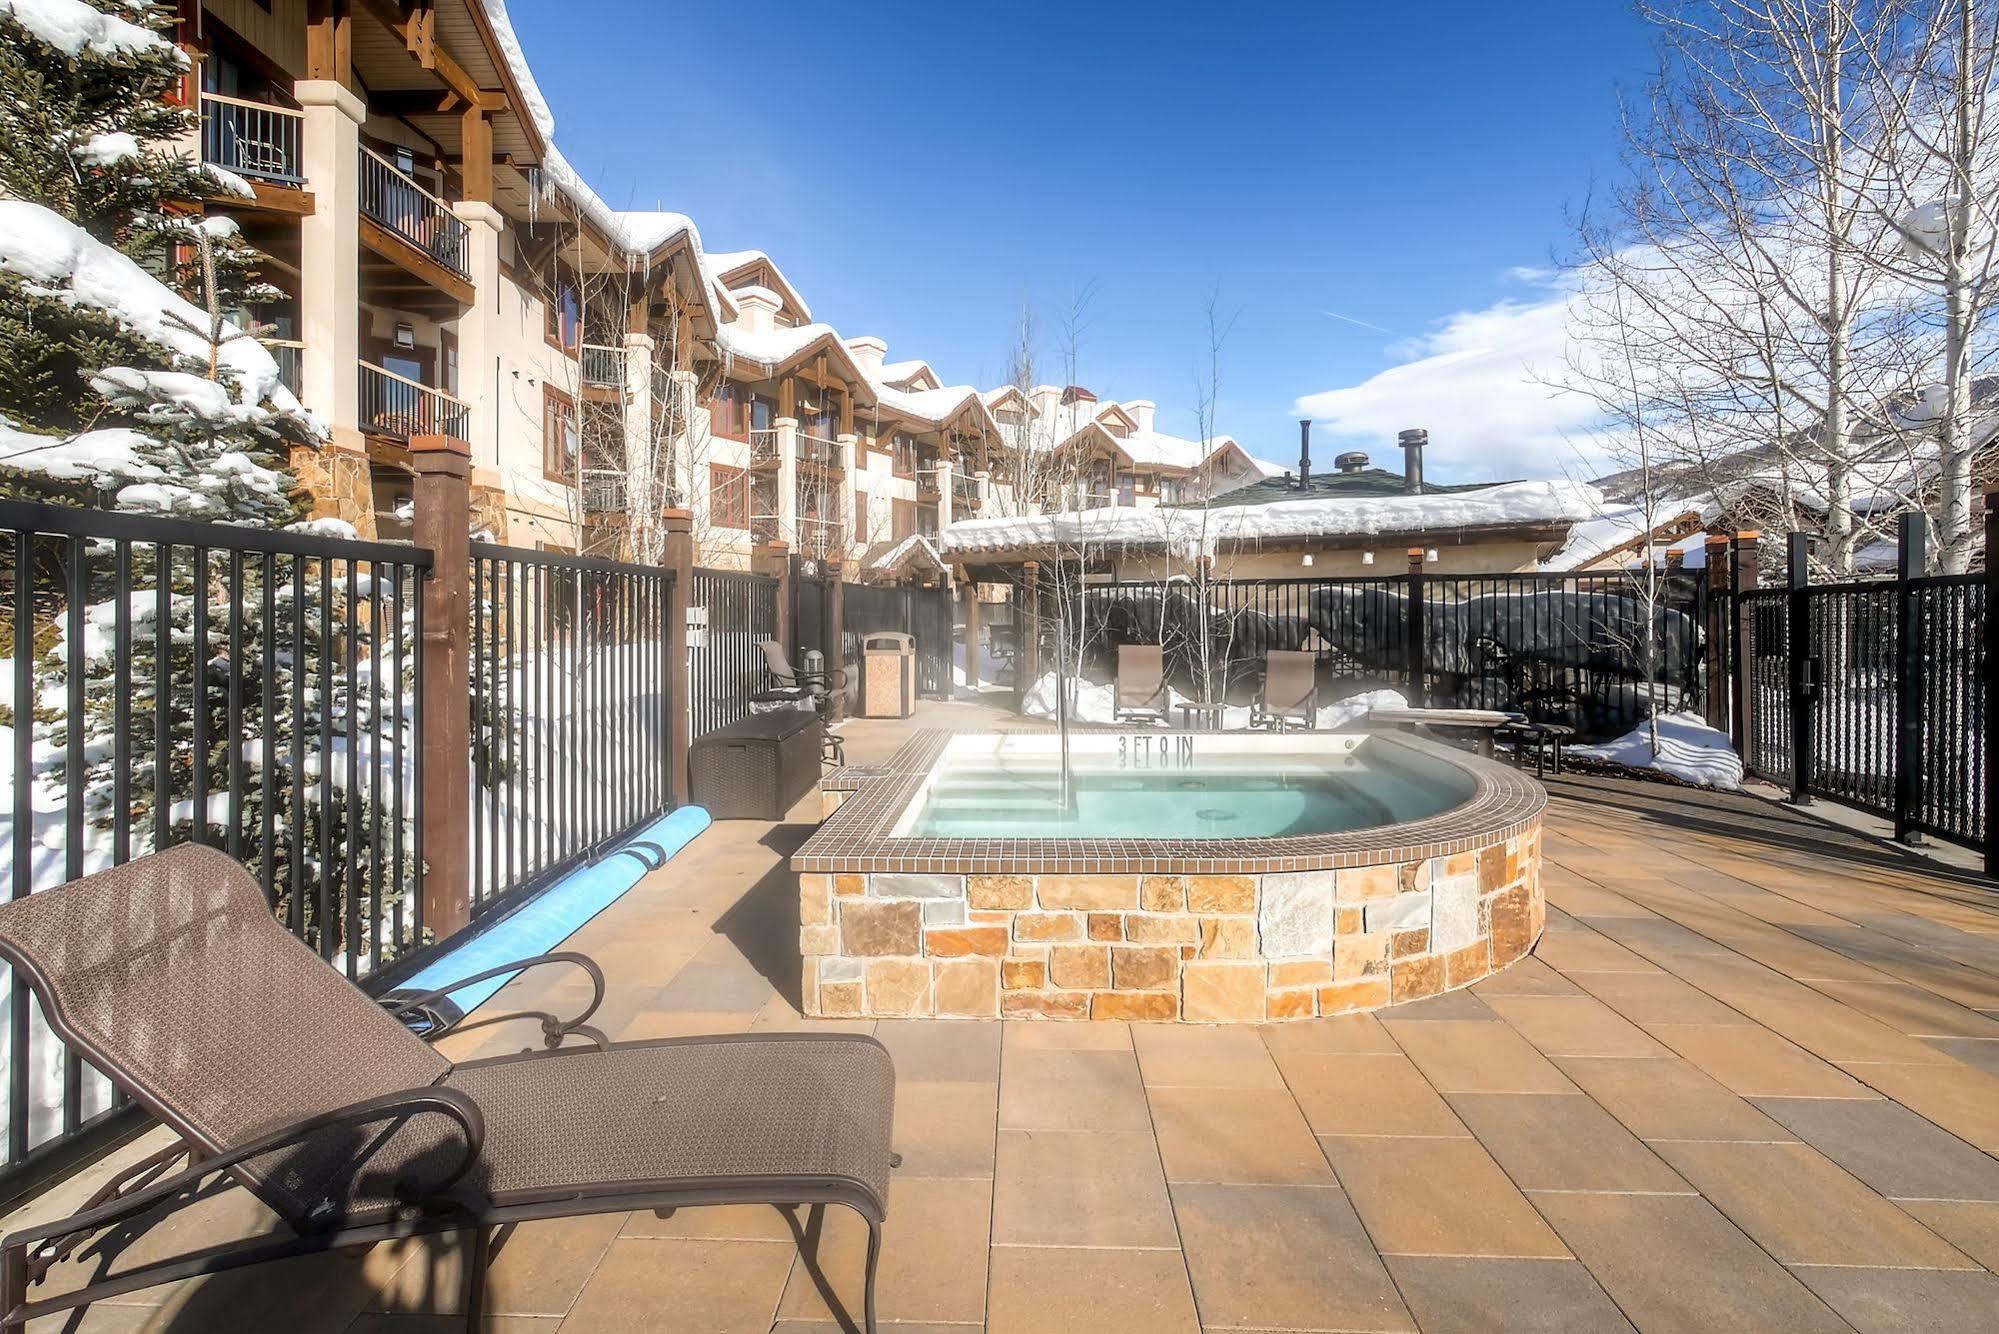 Eagleridge Lodge And Townhomes Steamboat Springs Exterior foto